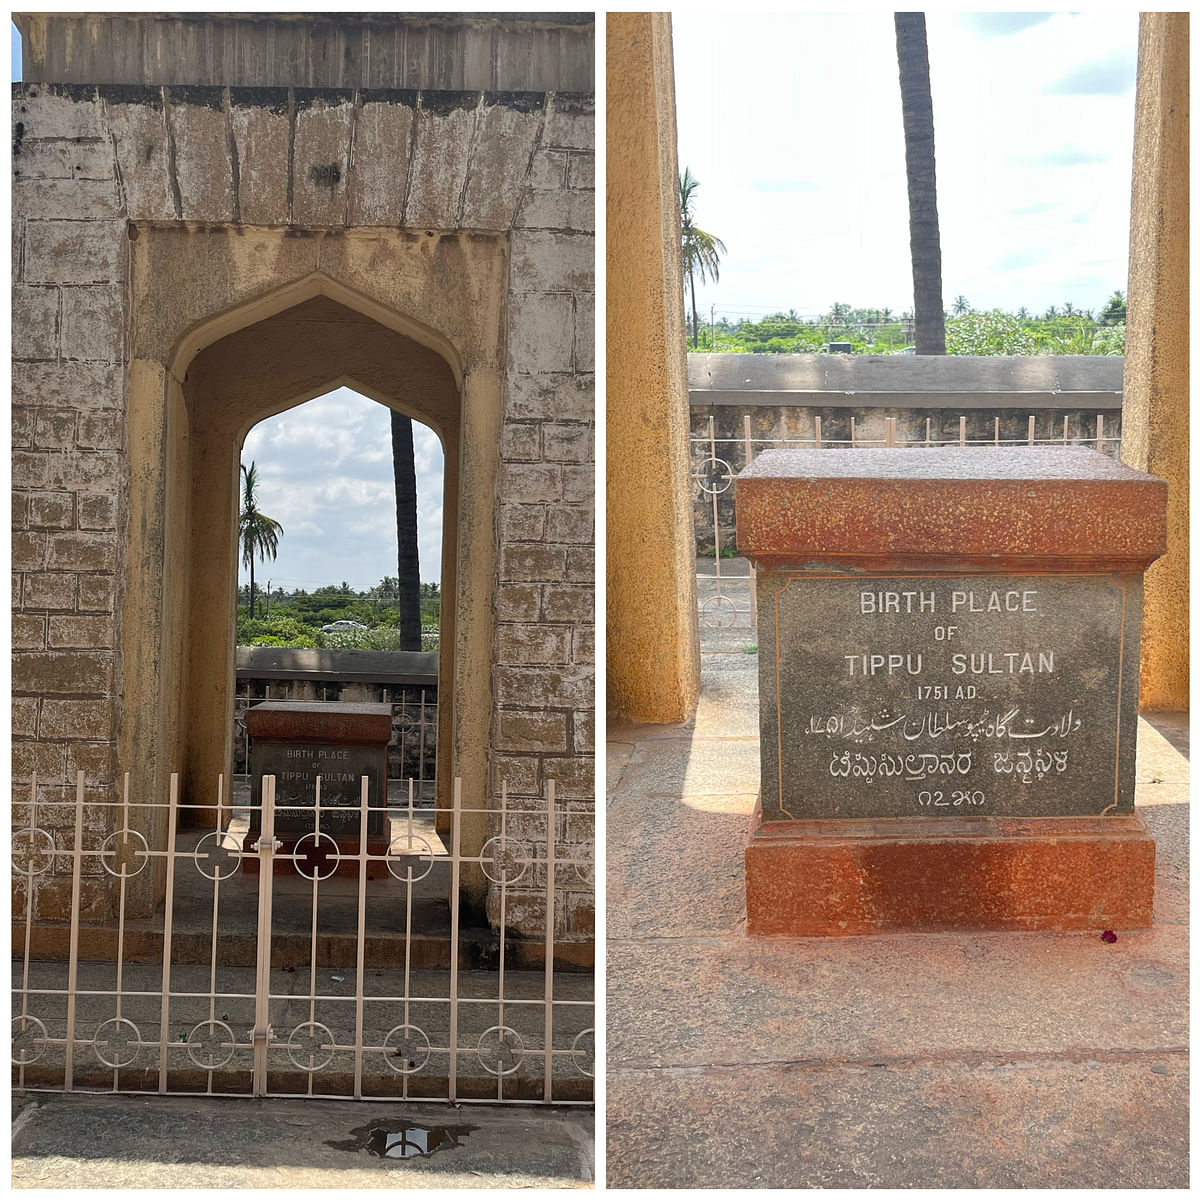 As BJP drums up politics around Tipu Sultan ahead of elections, here's what people have to say in his birthplace. 